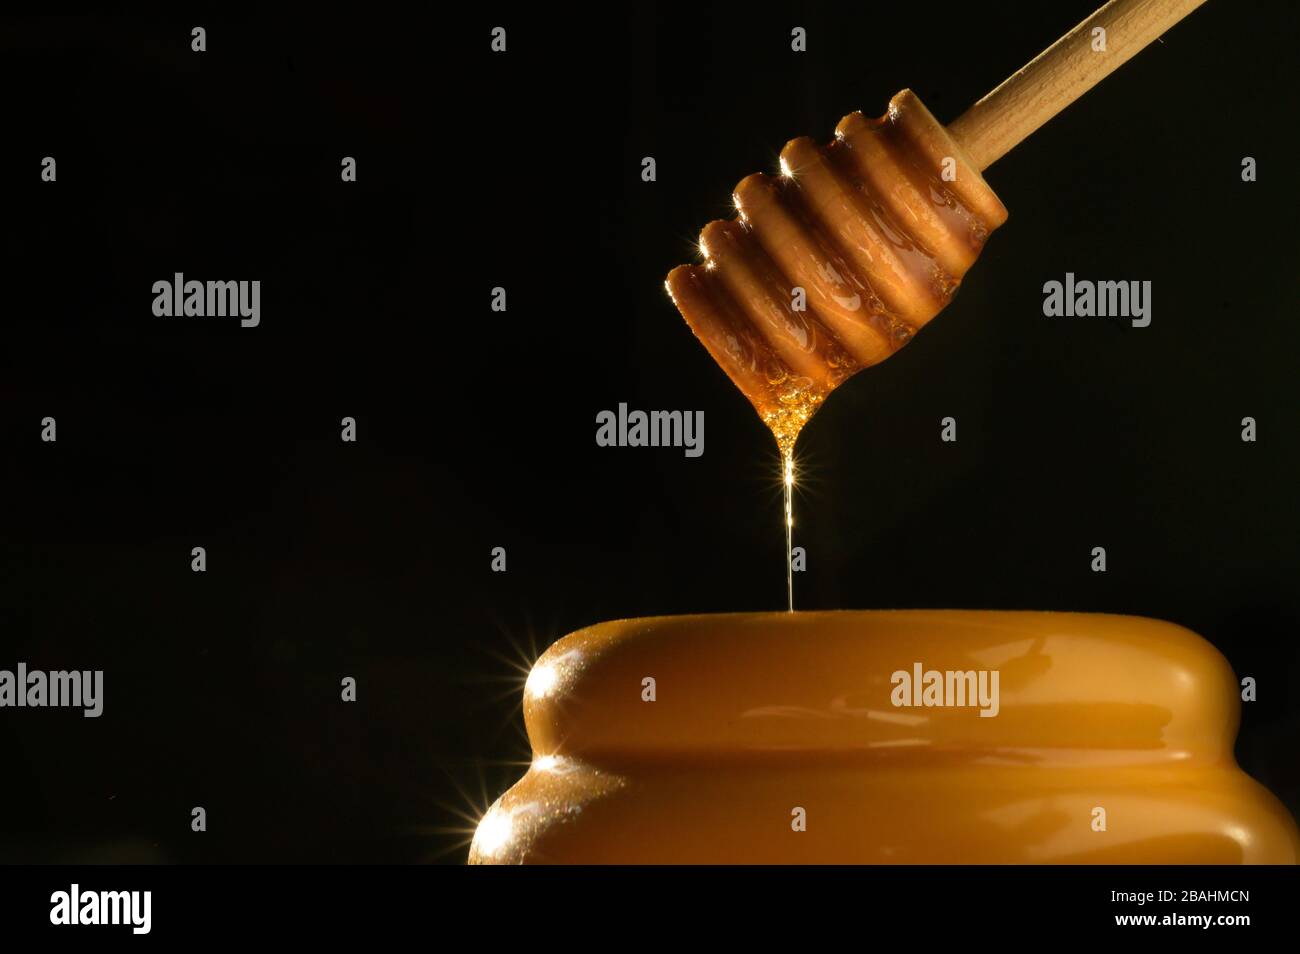 Tasty Dripping Honey pot photography - Low Key food images - high-quality food photos - Product photography Stock Photo